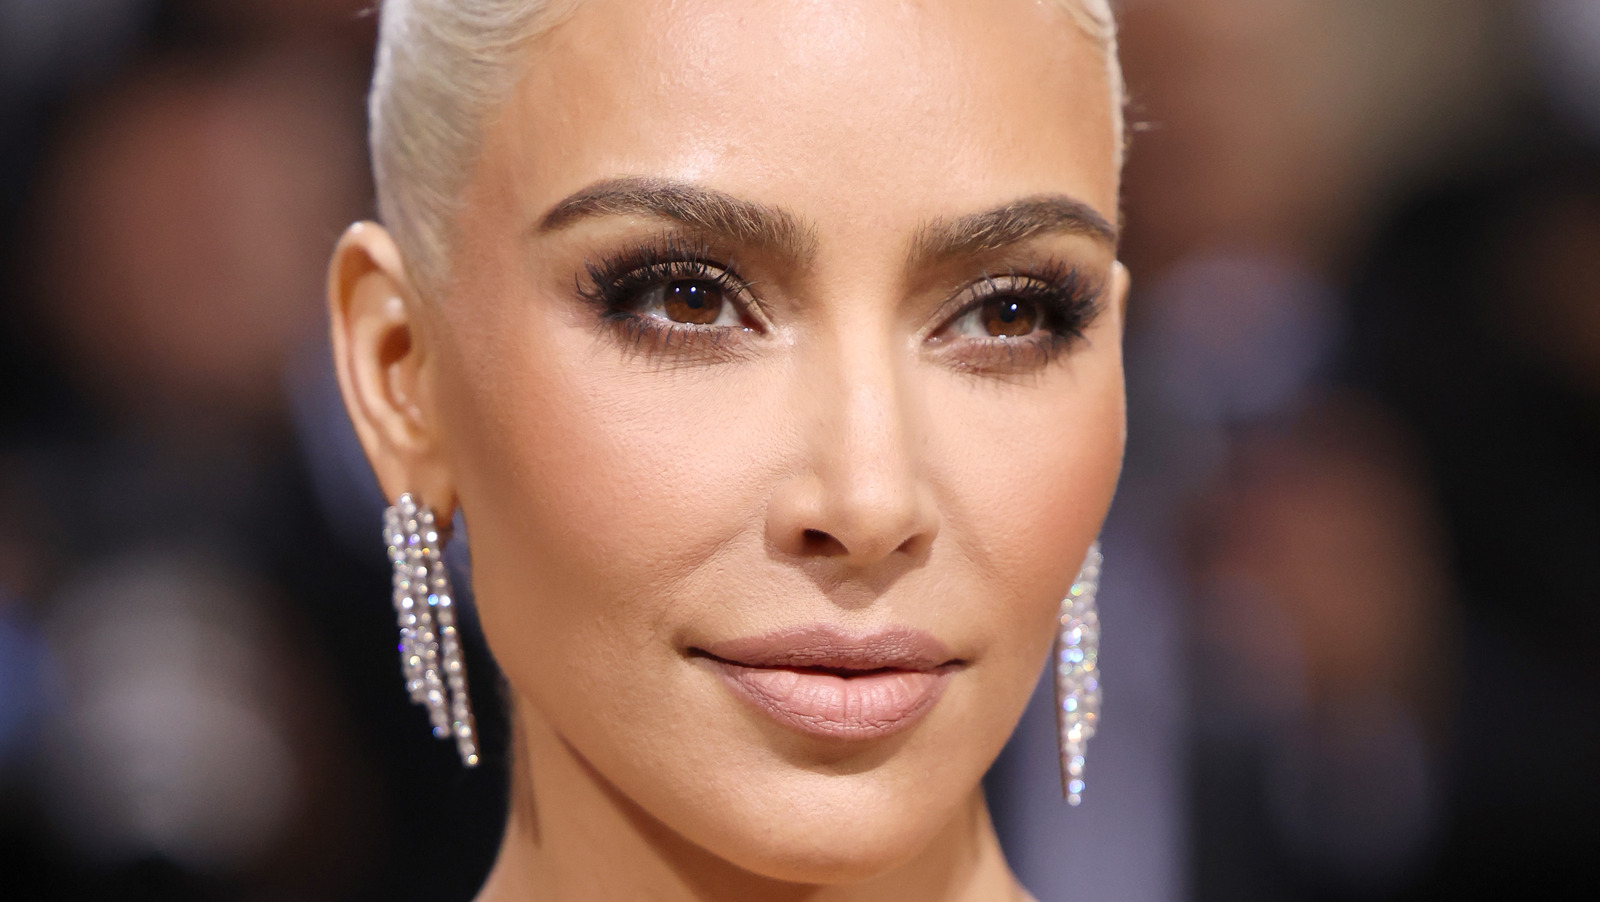 Kim Kardashian Says North West Is “Very Opinionated” About Her